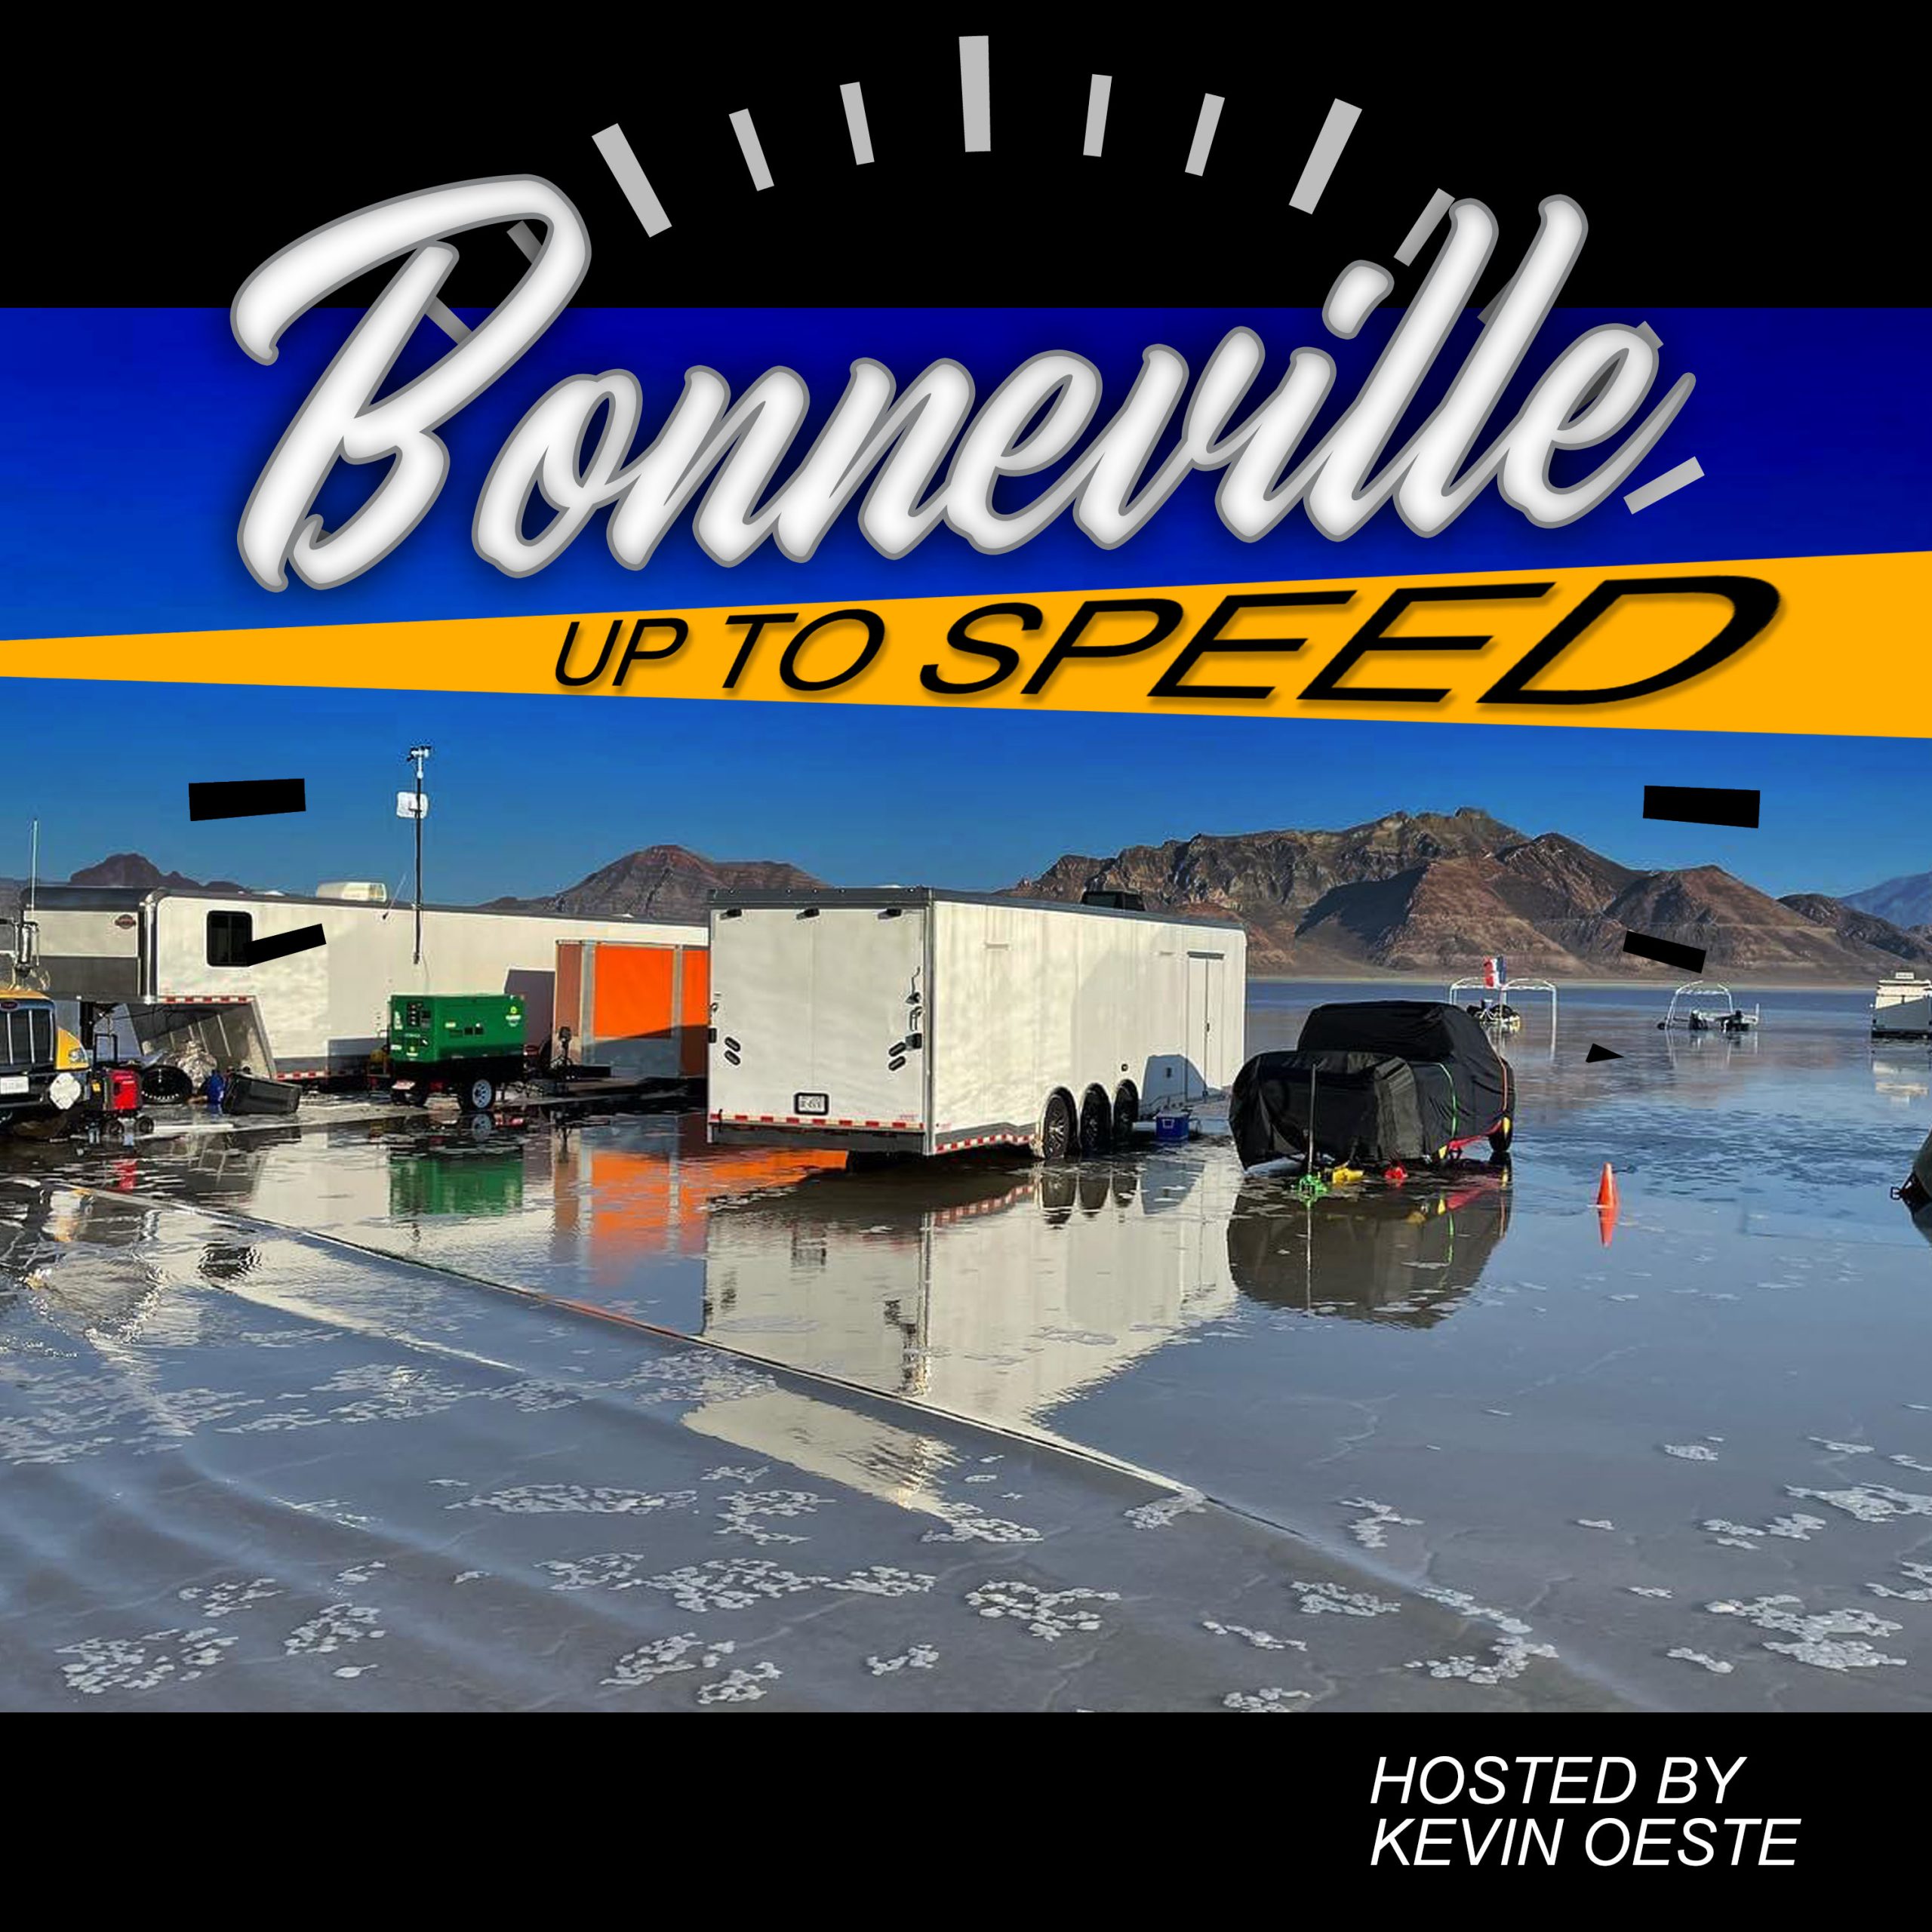 2022 Speed Week or Speed Weekend? Views from New Zealand on the Bonneville Up To Speed Podcast